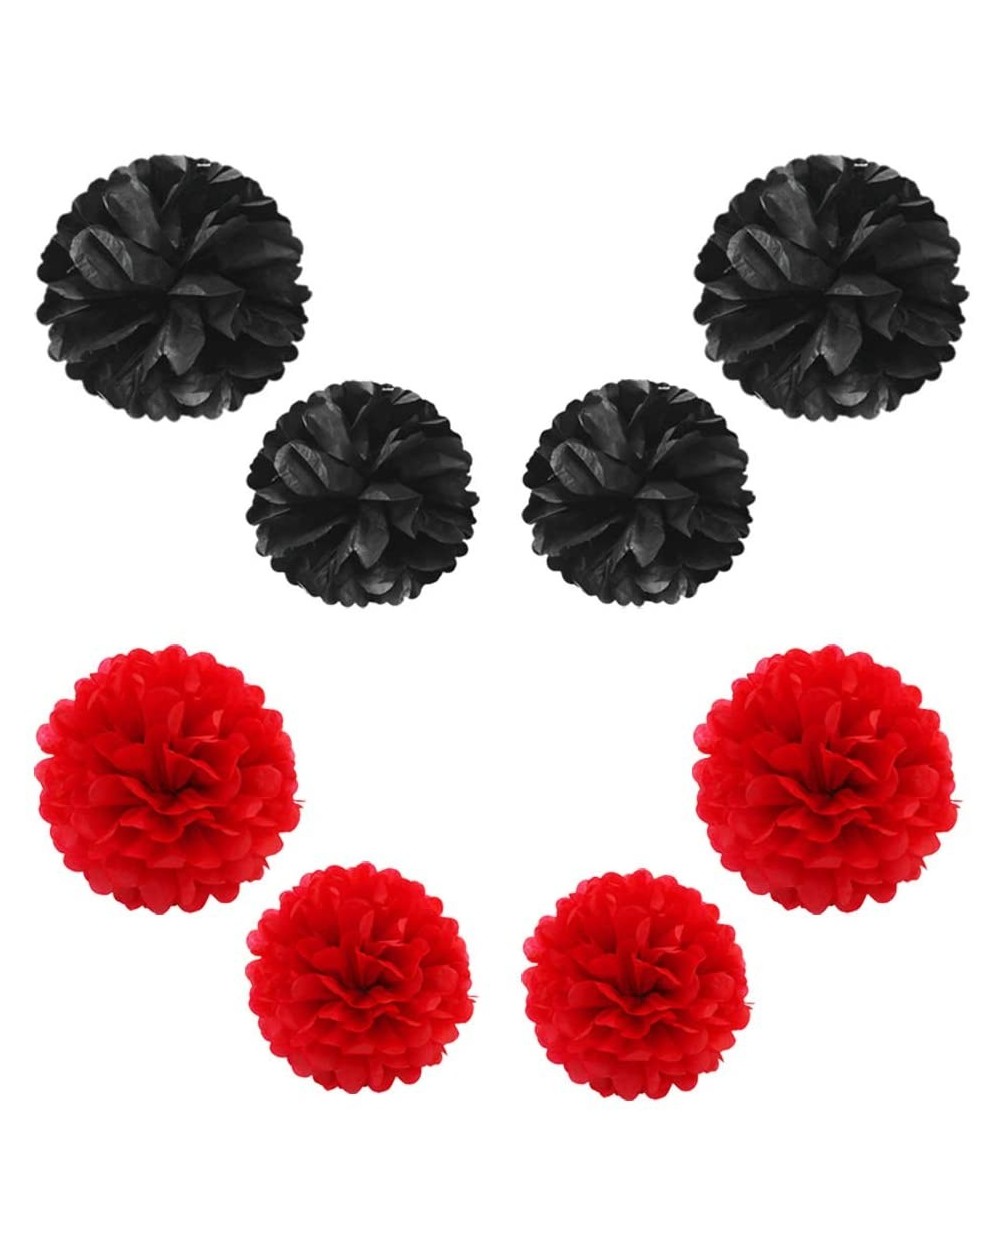 Tissue Pom Poms Black and Red Paper Pom Poms - Party Tissue Paper Flowers Balls - Party Hanging Decoration Supplies - Size of...